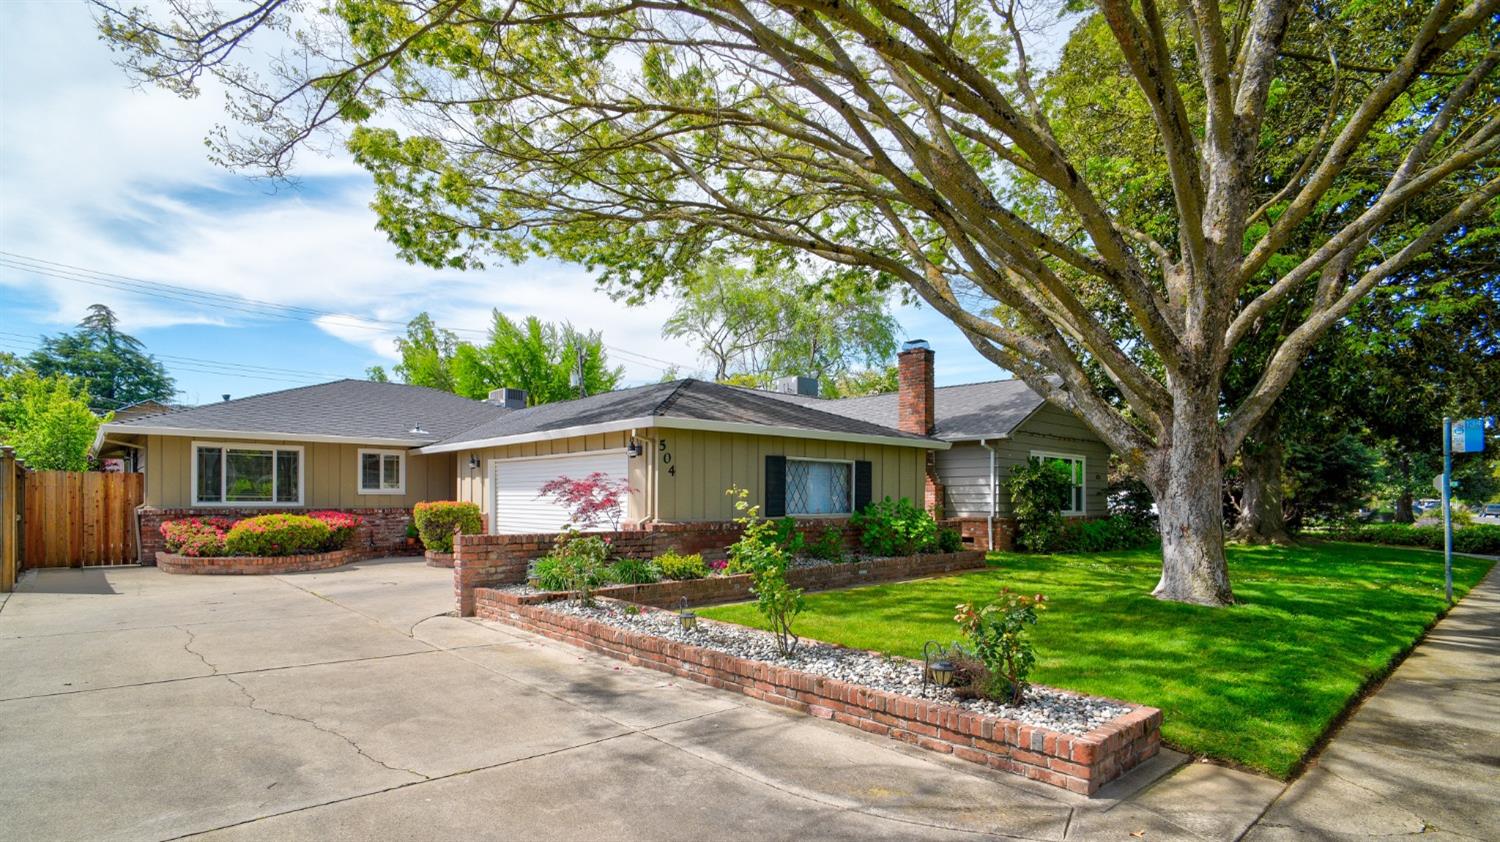 Photo of 504 Meister Wy in Sacramento, CA